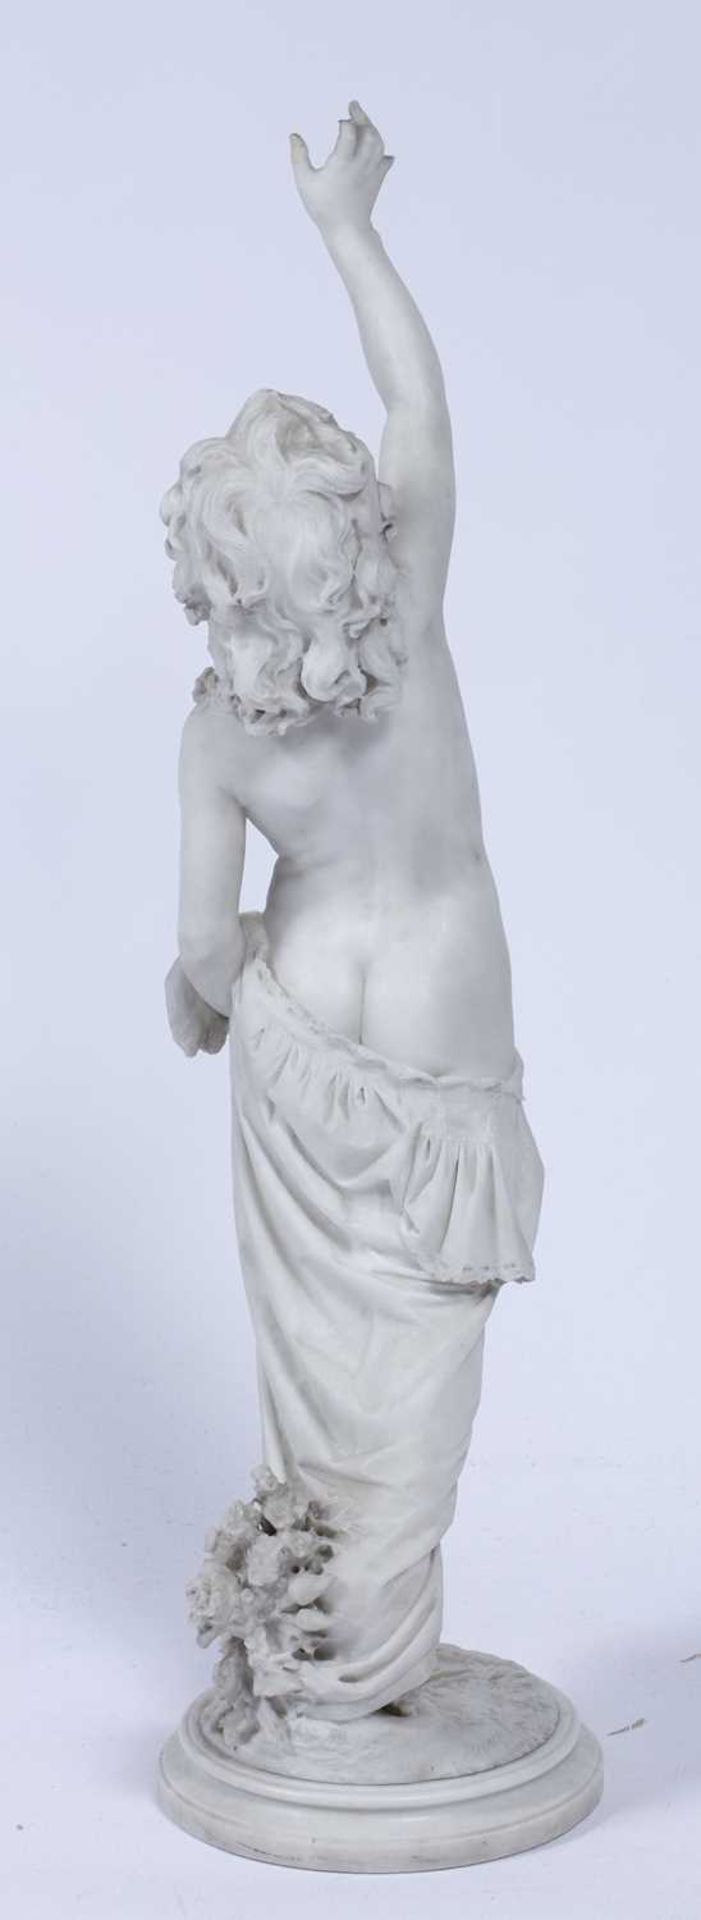 Donato Barcaglia (1849-1930) Marble sculpture of a young girl with her hand raised, on a circular - Image 4 of 6